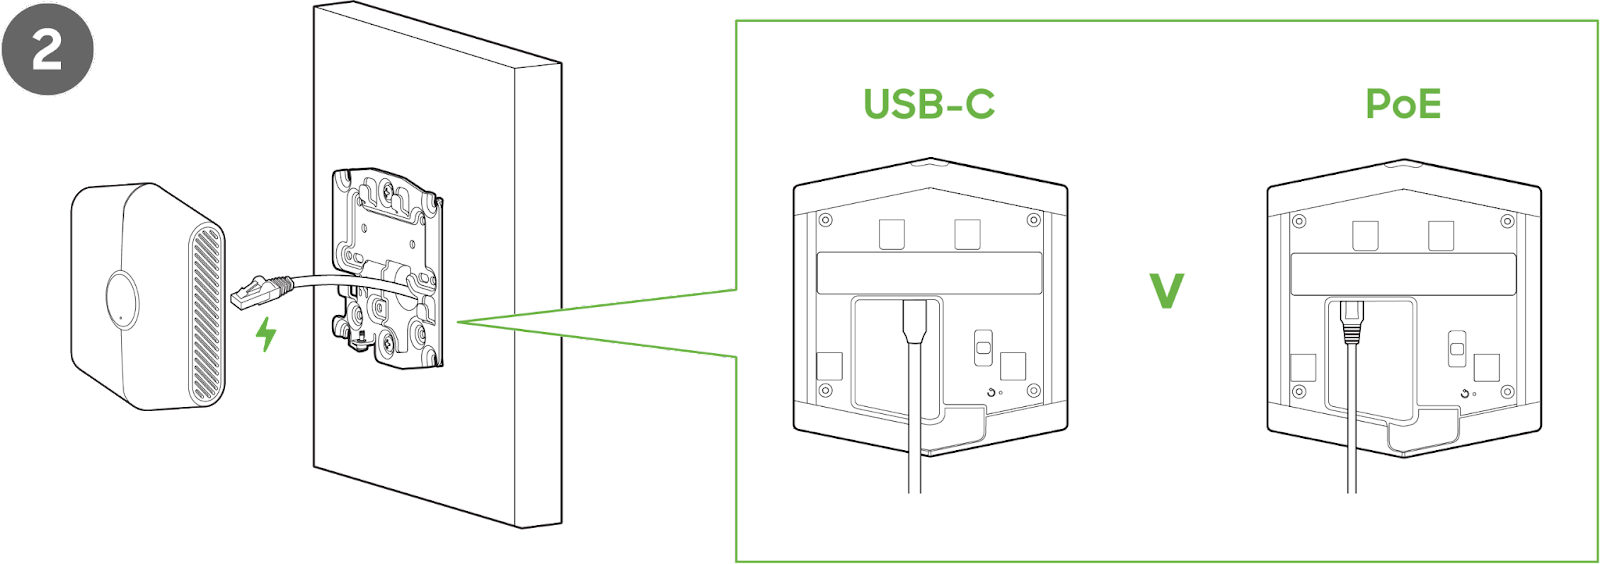 Step 2 mounting instructions. Picture shows the power source can be an USB C cable versus a PoE ethernet cable.